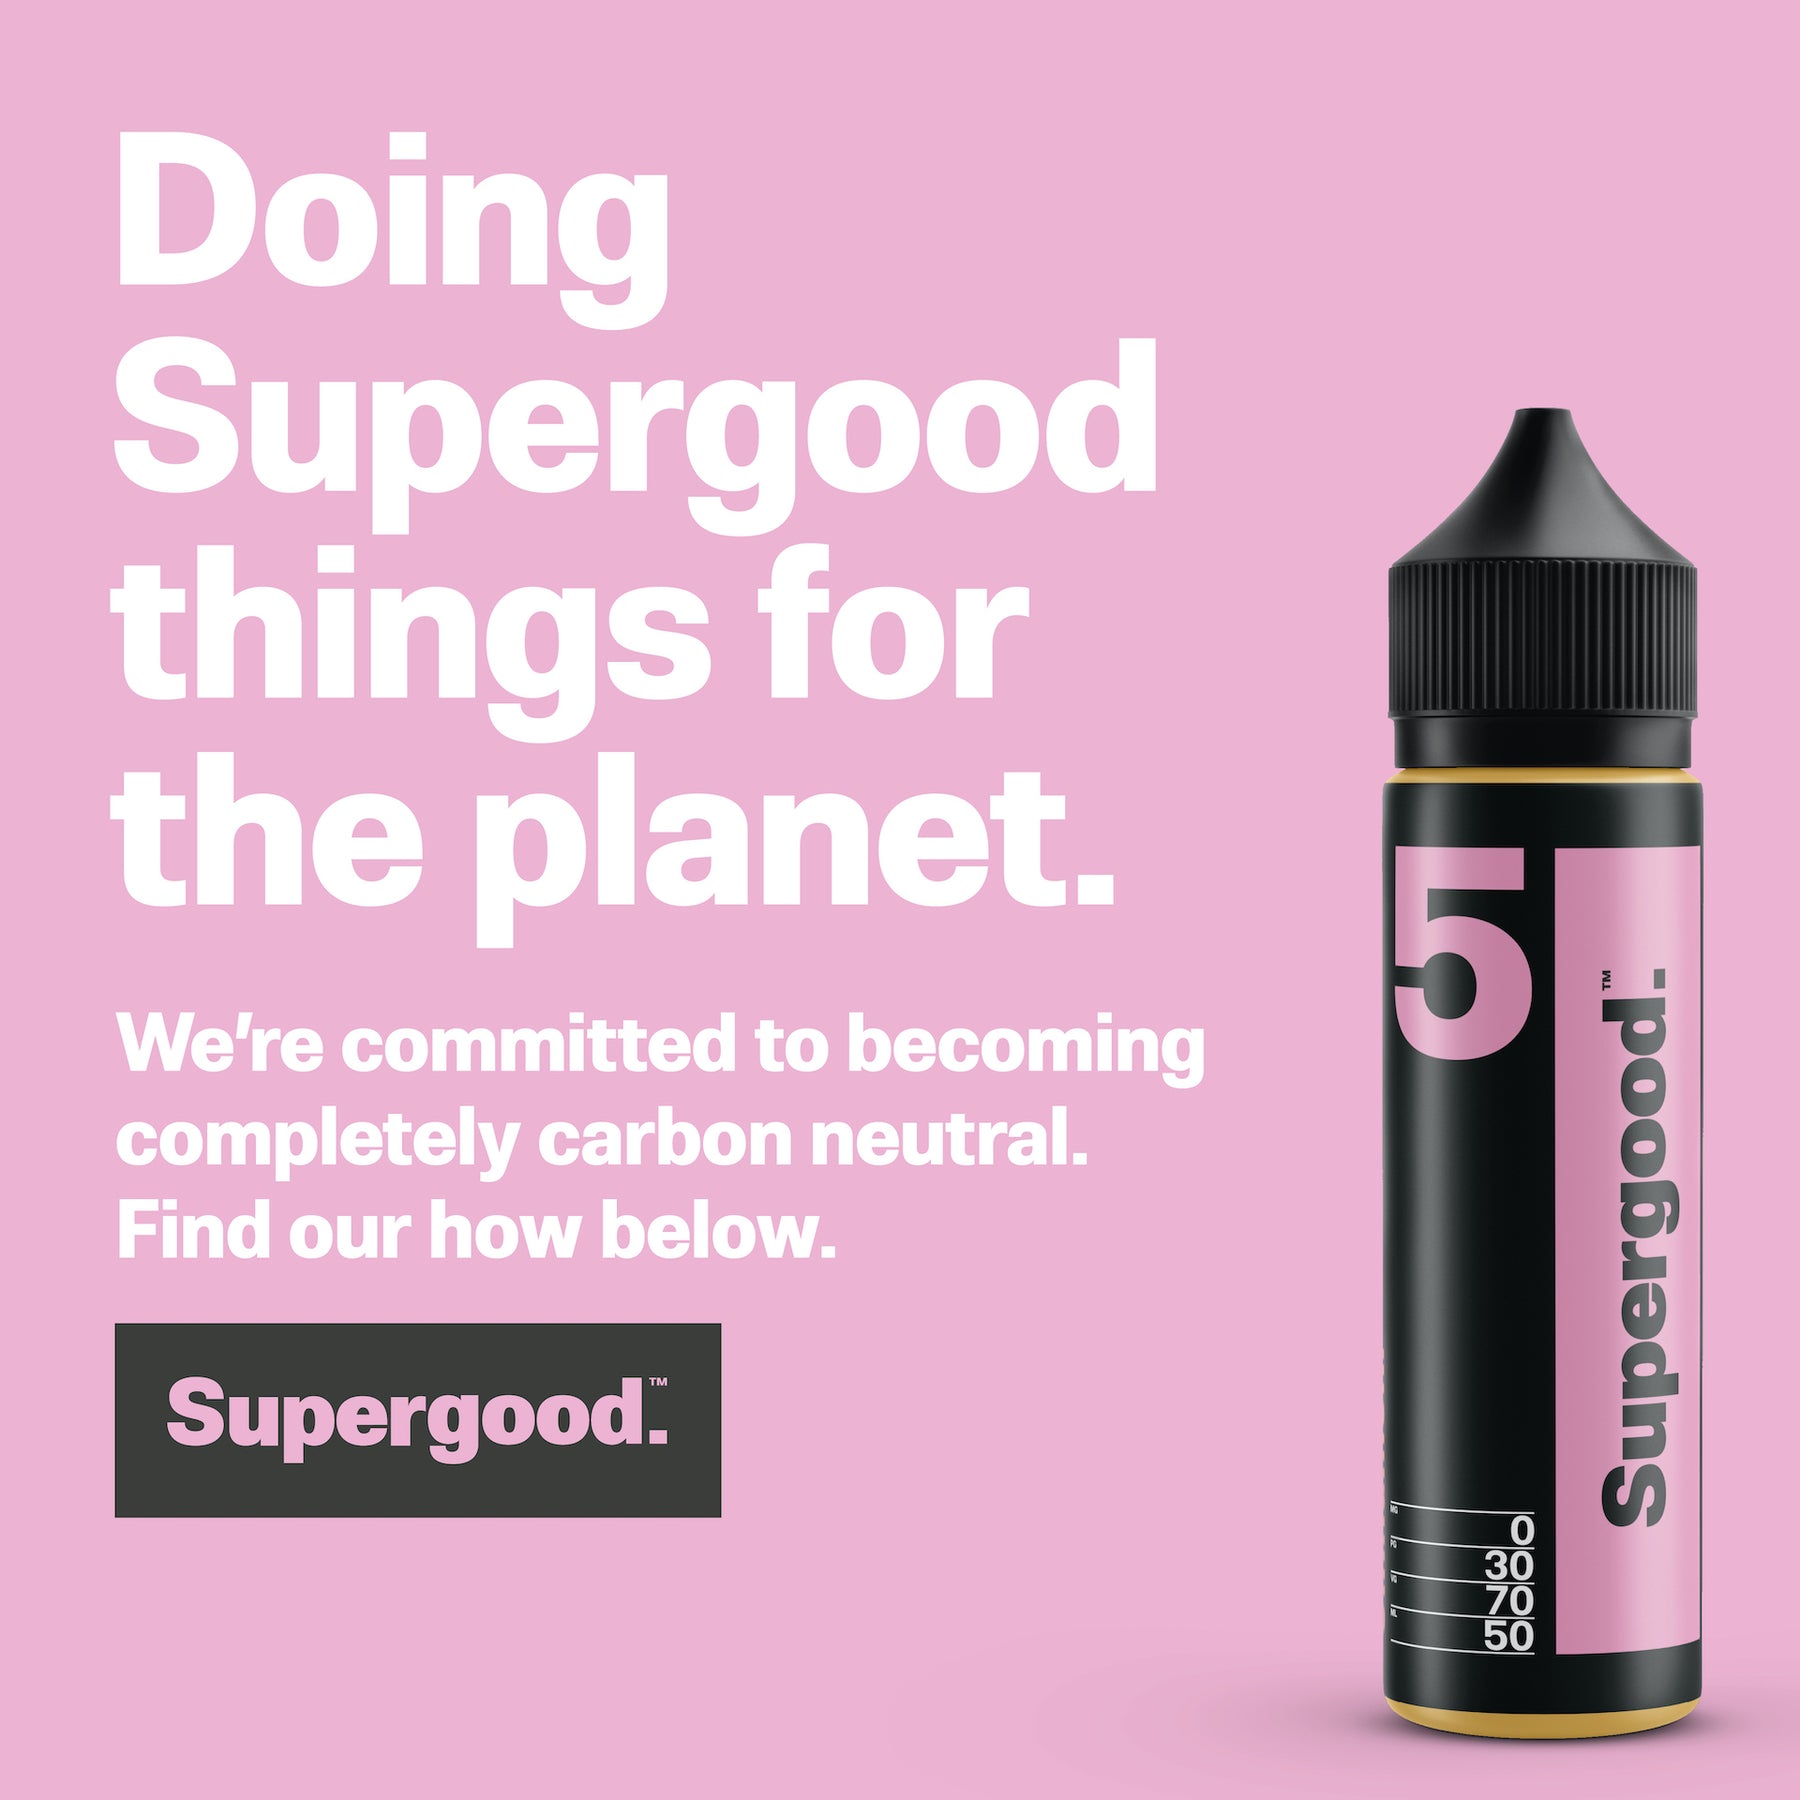 Supergood's Journey To Carbon Neutral.